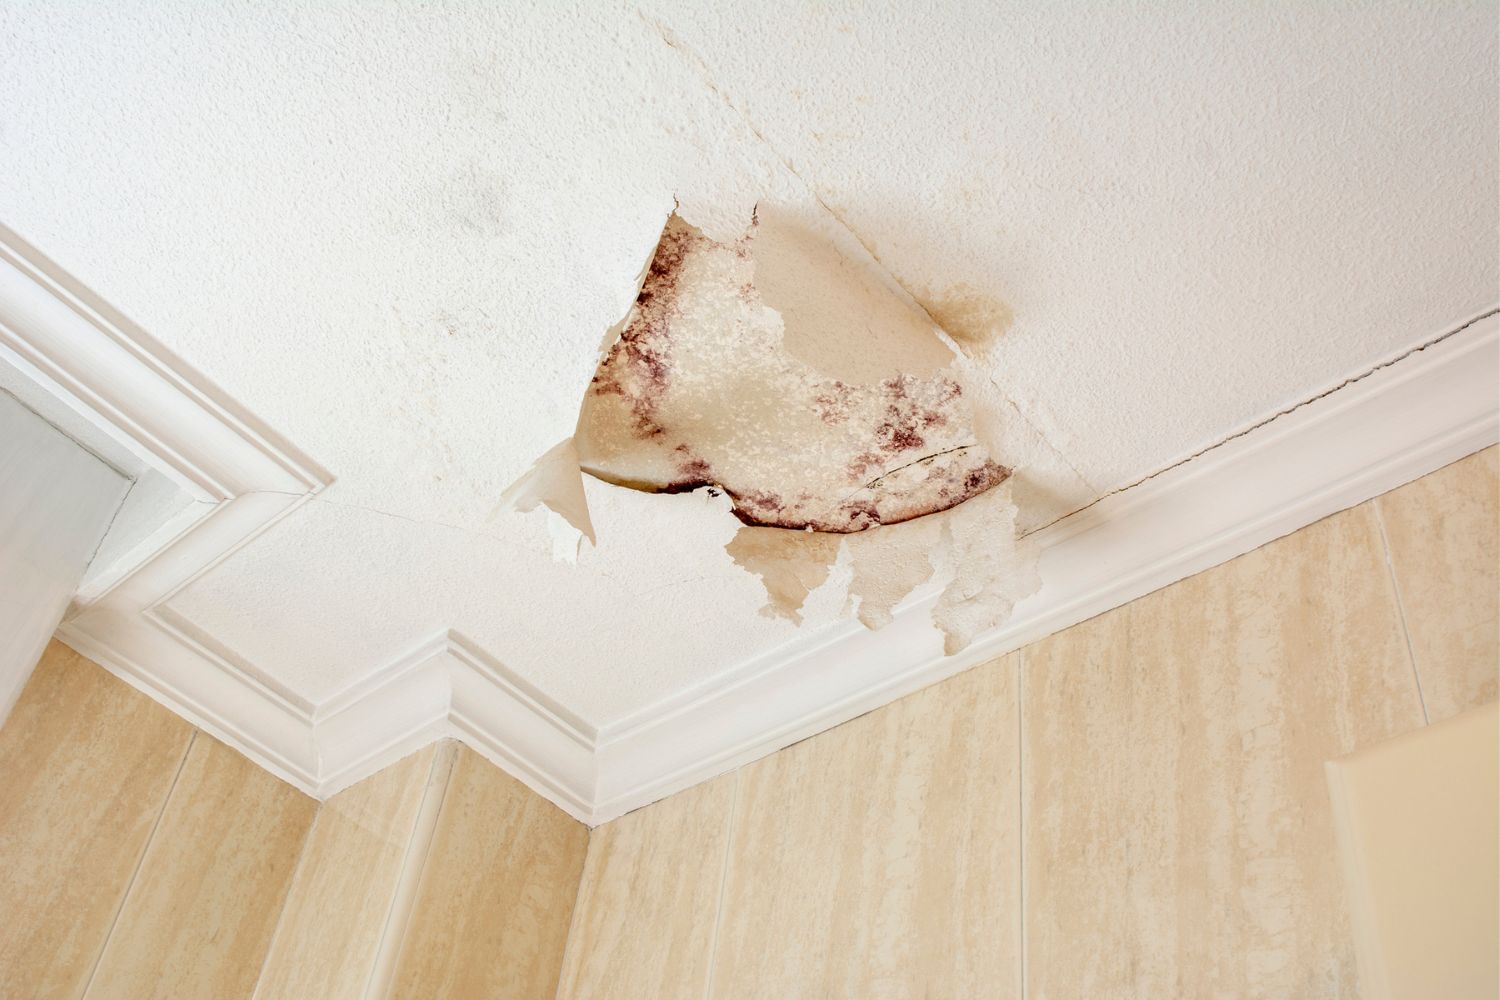 Who to Call for Water Leak in Ceiling